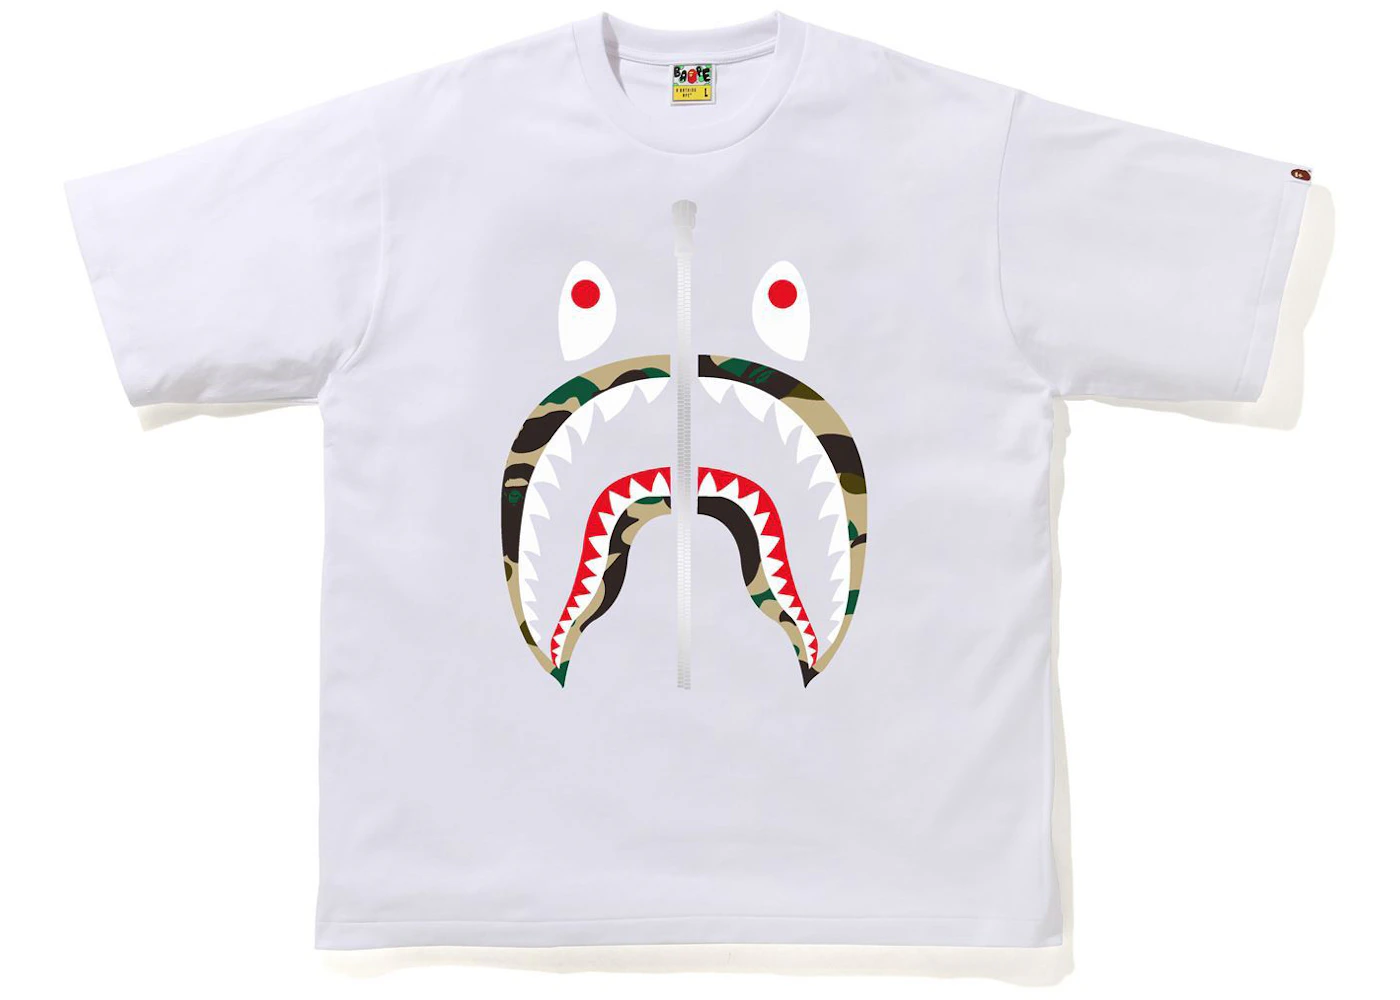 BAPE 1st Camo Shark Relaxed Fit Tee White/Yellow Men's - SS21 - US